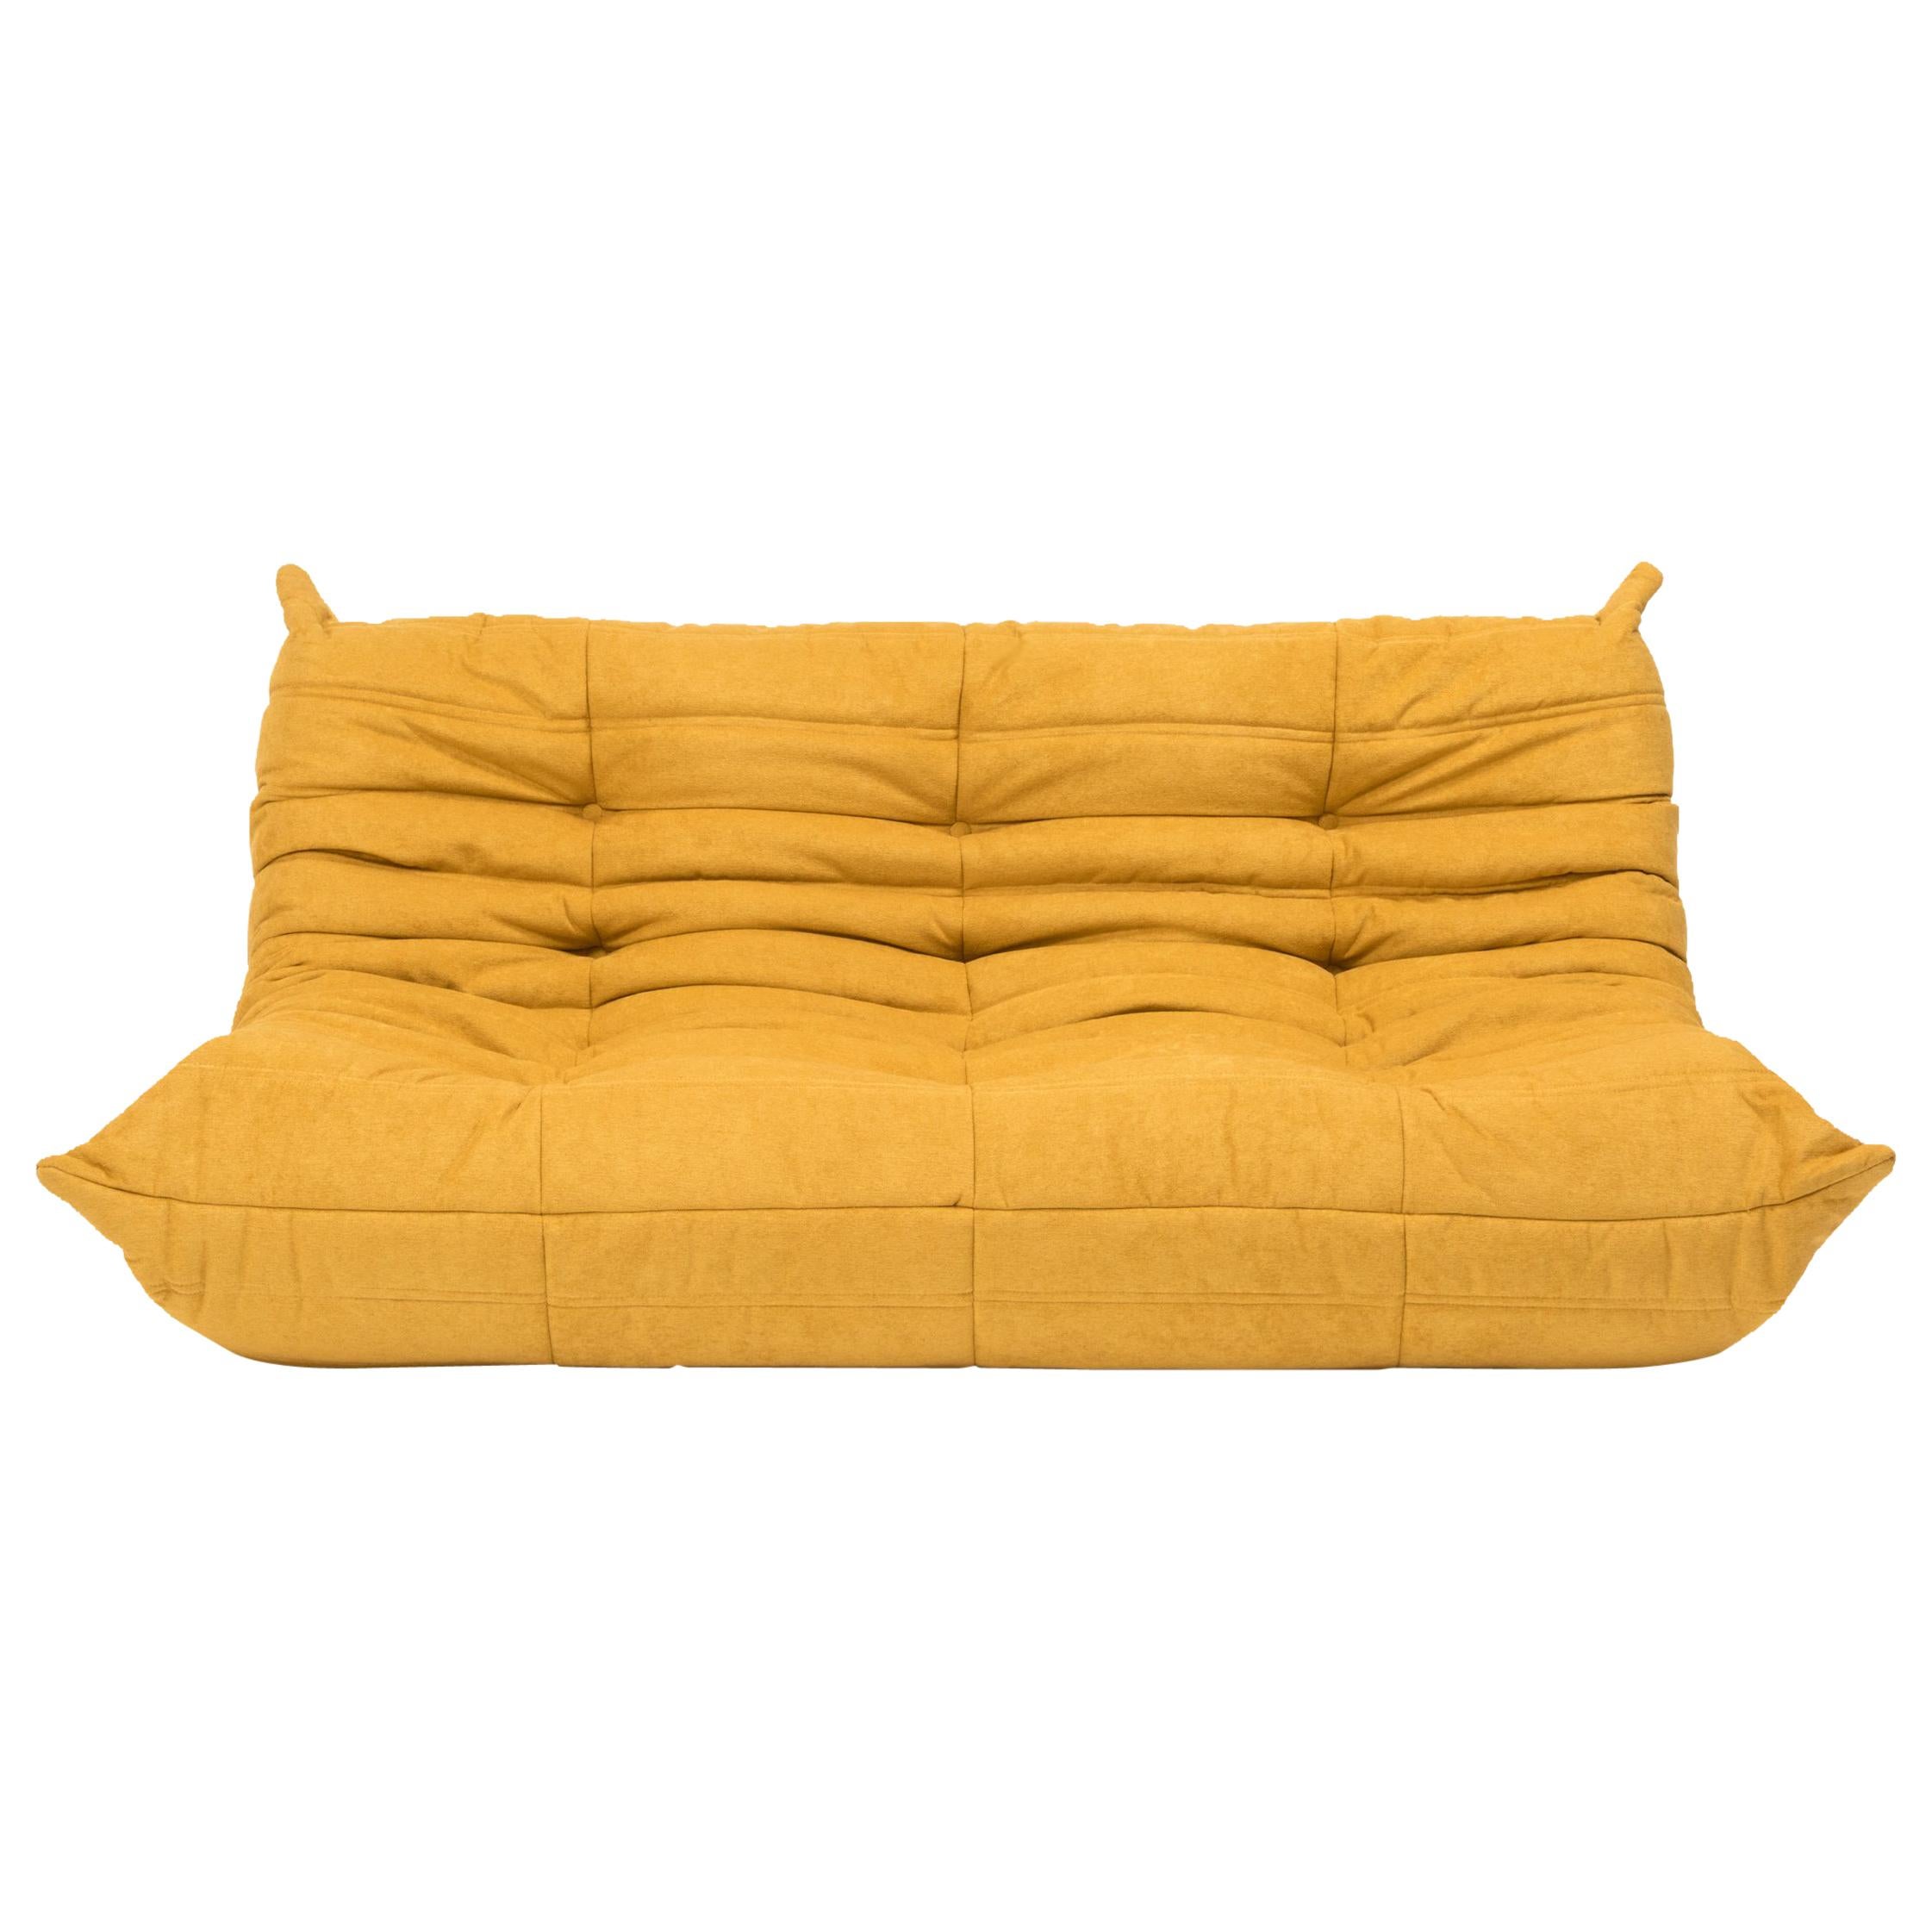 Large Togo Yellow Fabric Sofa by Michel Ducaroy for Ligne Roset